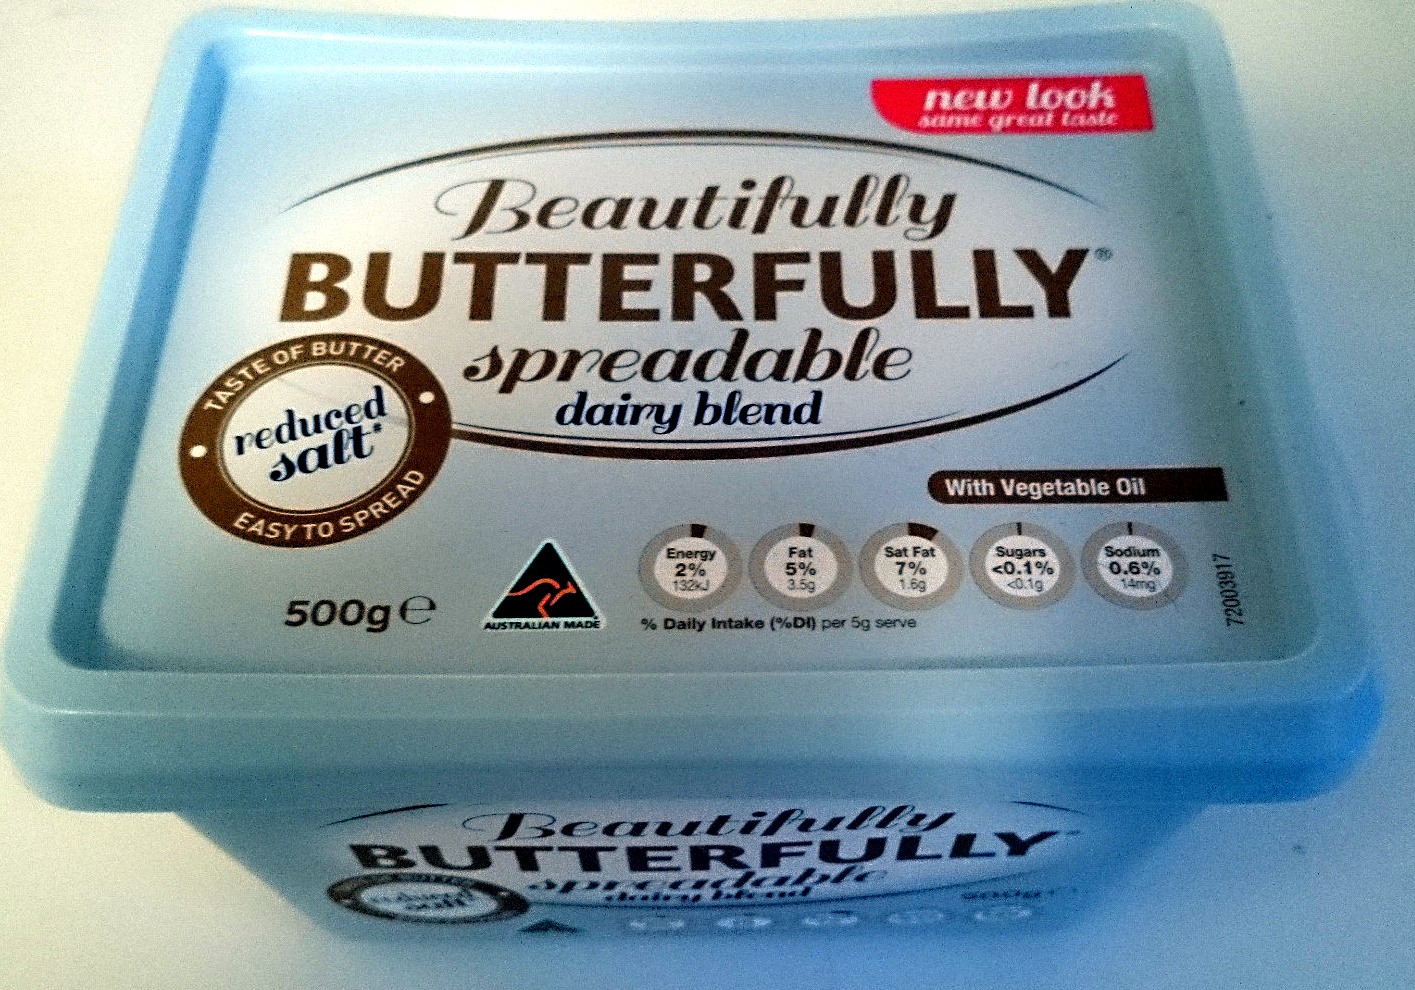 Beautifully Butterfully Salt Reduced - Product